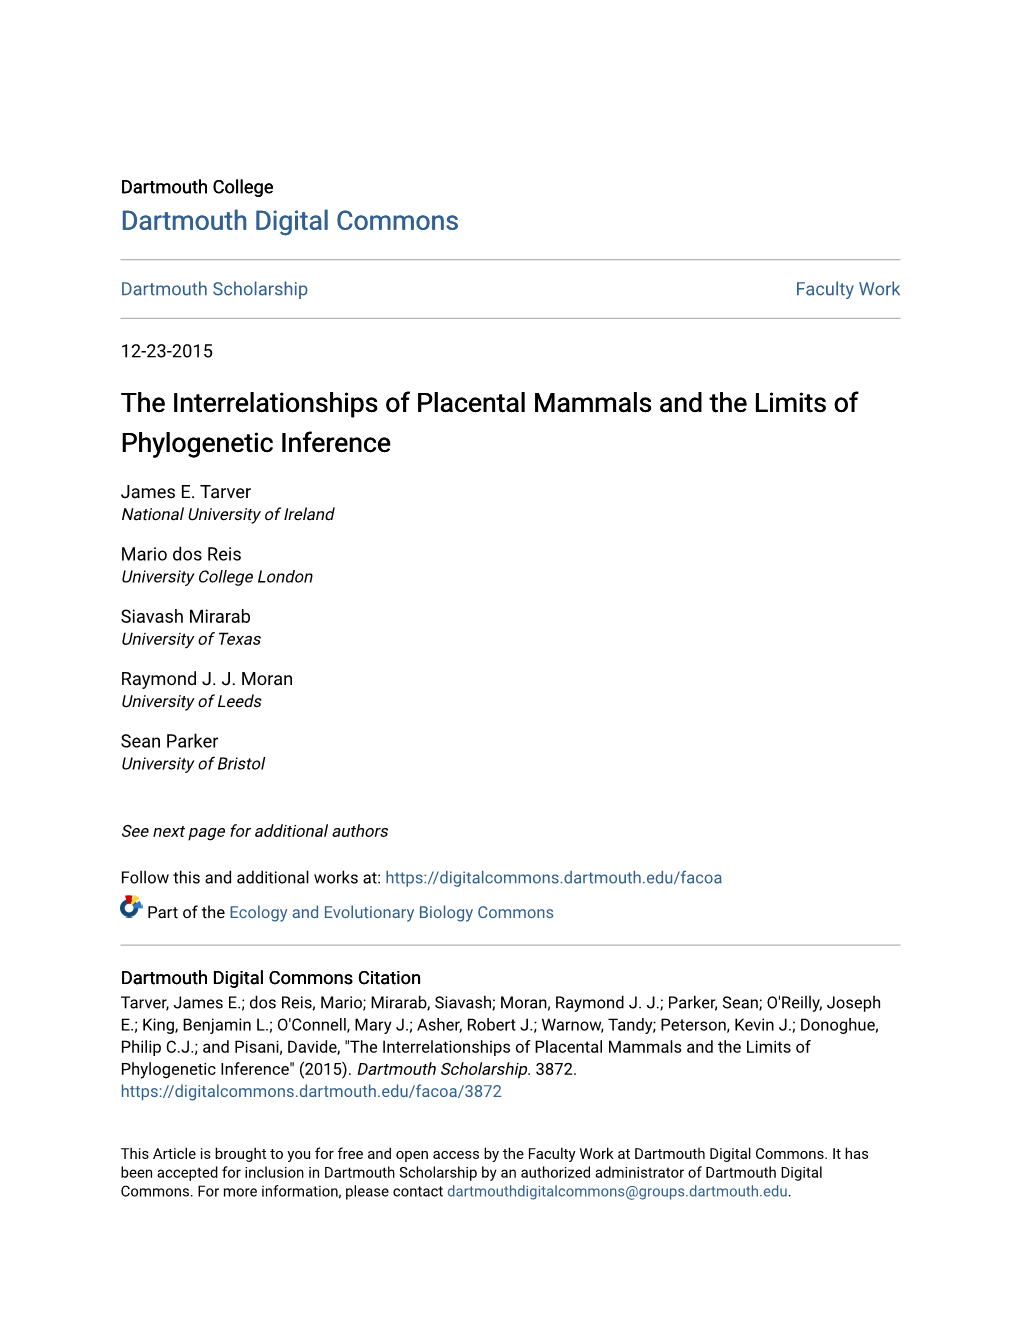 The Interrelationships of Placental Mammals and the Limits of Phylogenetic Inference